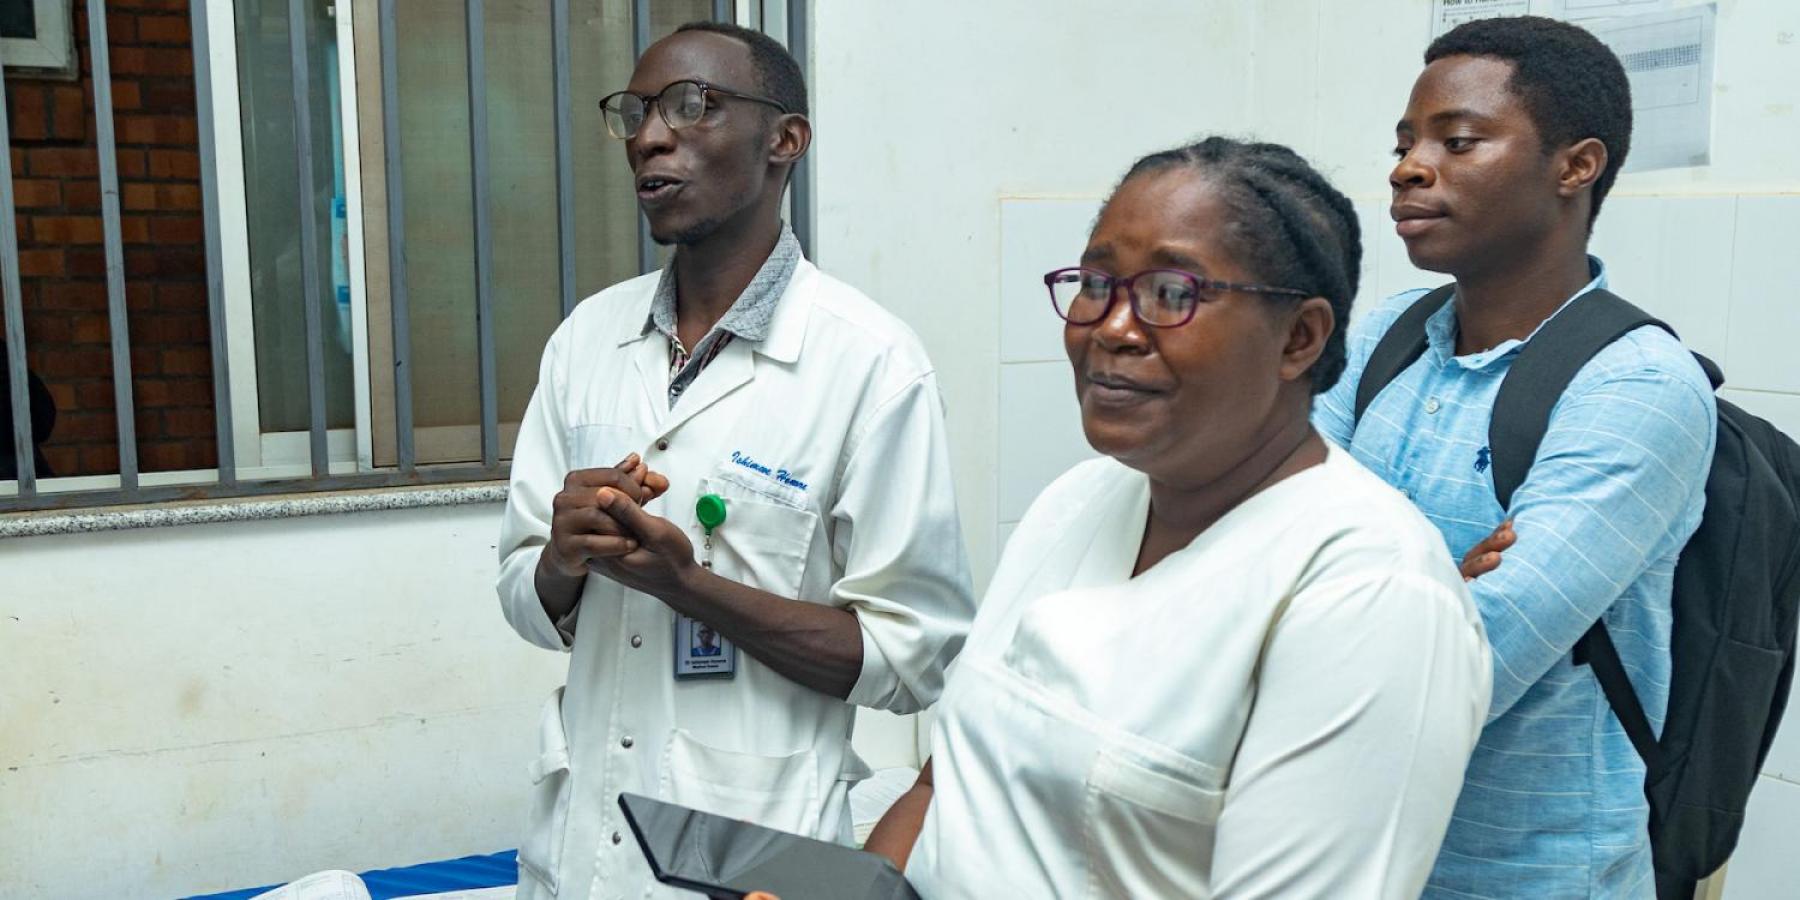 Civil society and government join forces to accelerate cancer care for women in Rwanda